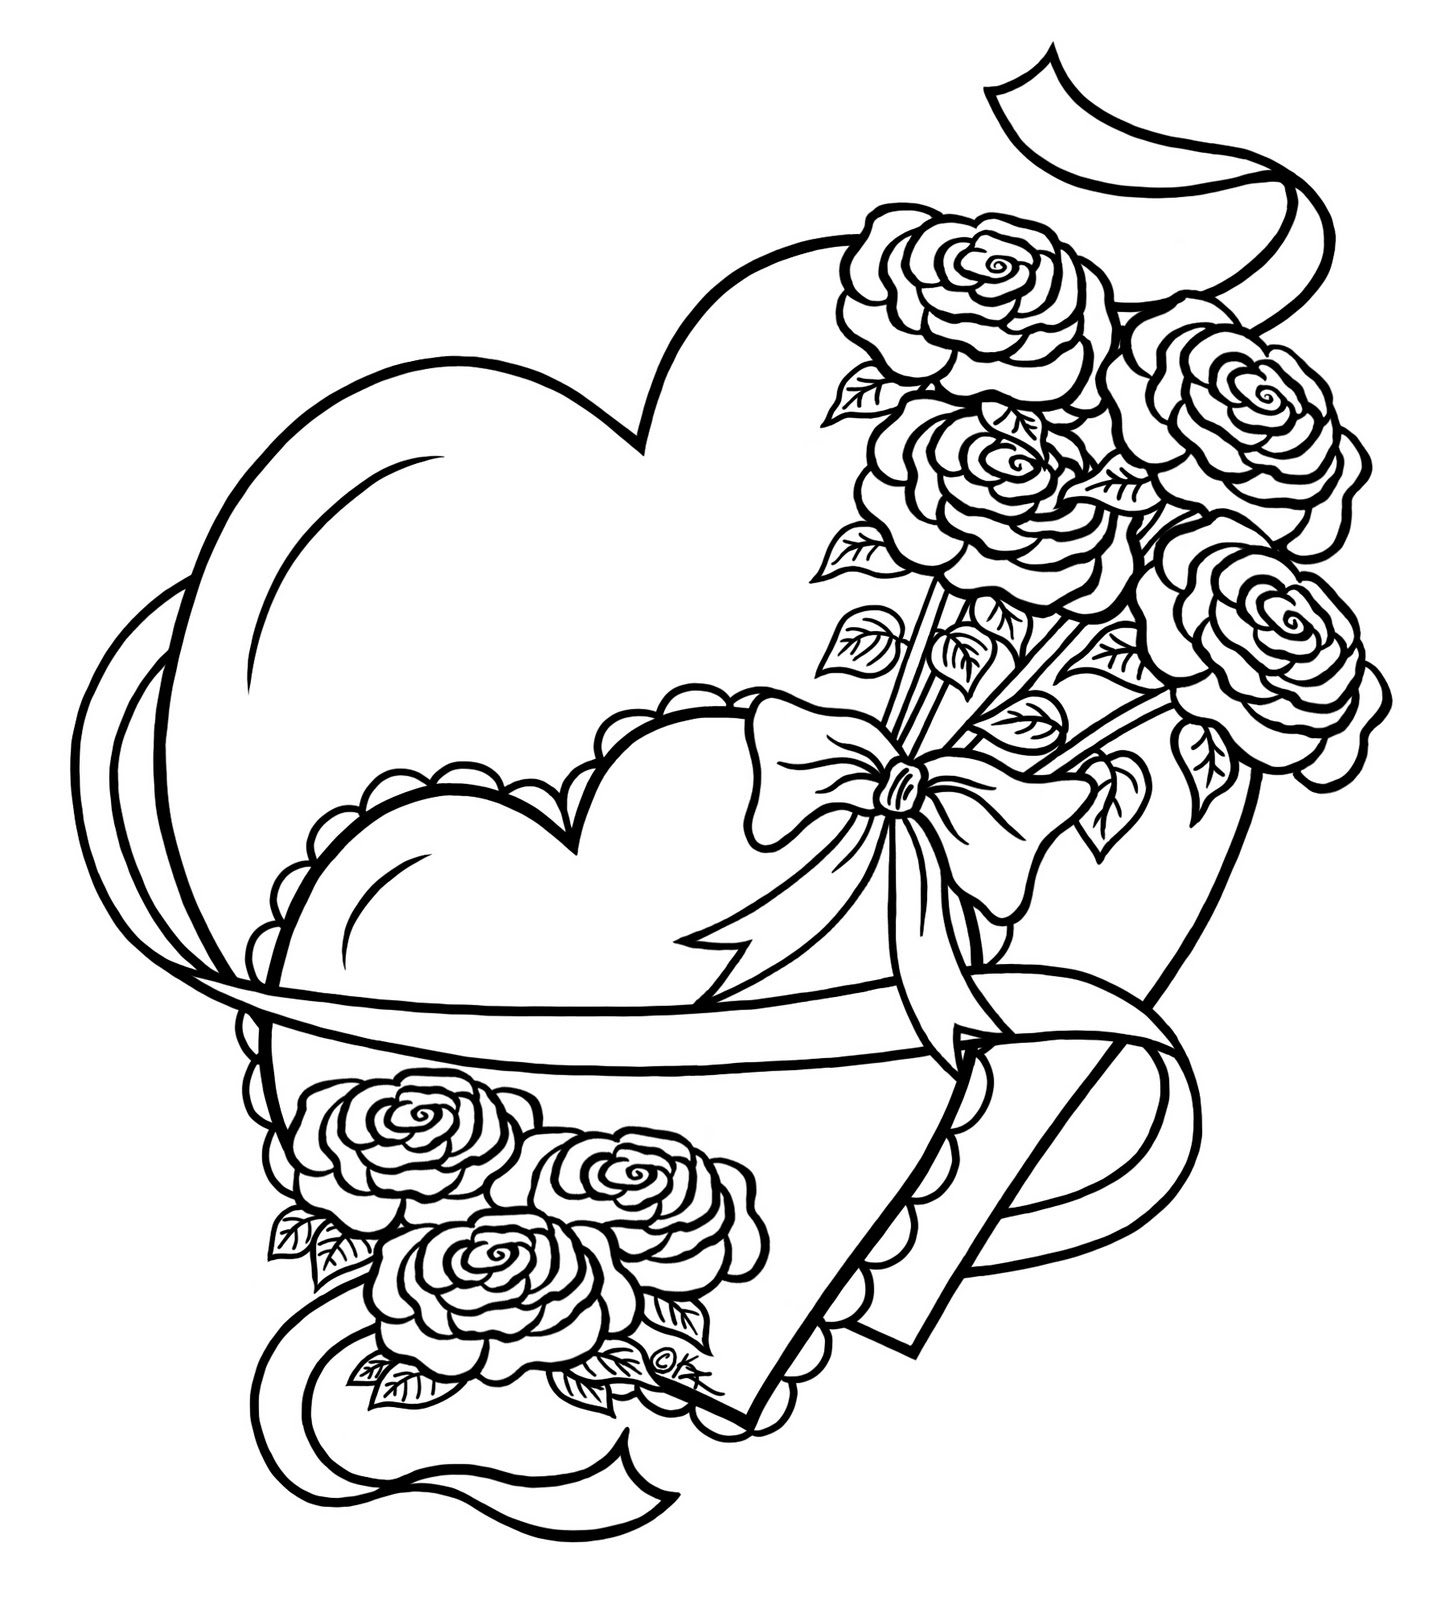 Cool Drawings Of Roses And Hearts | fashionplaceface.